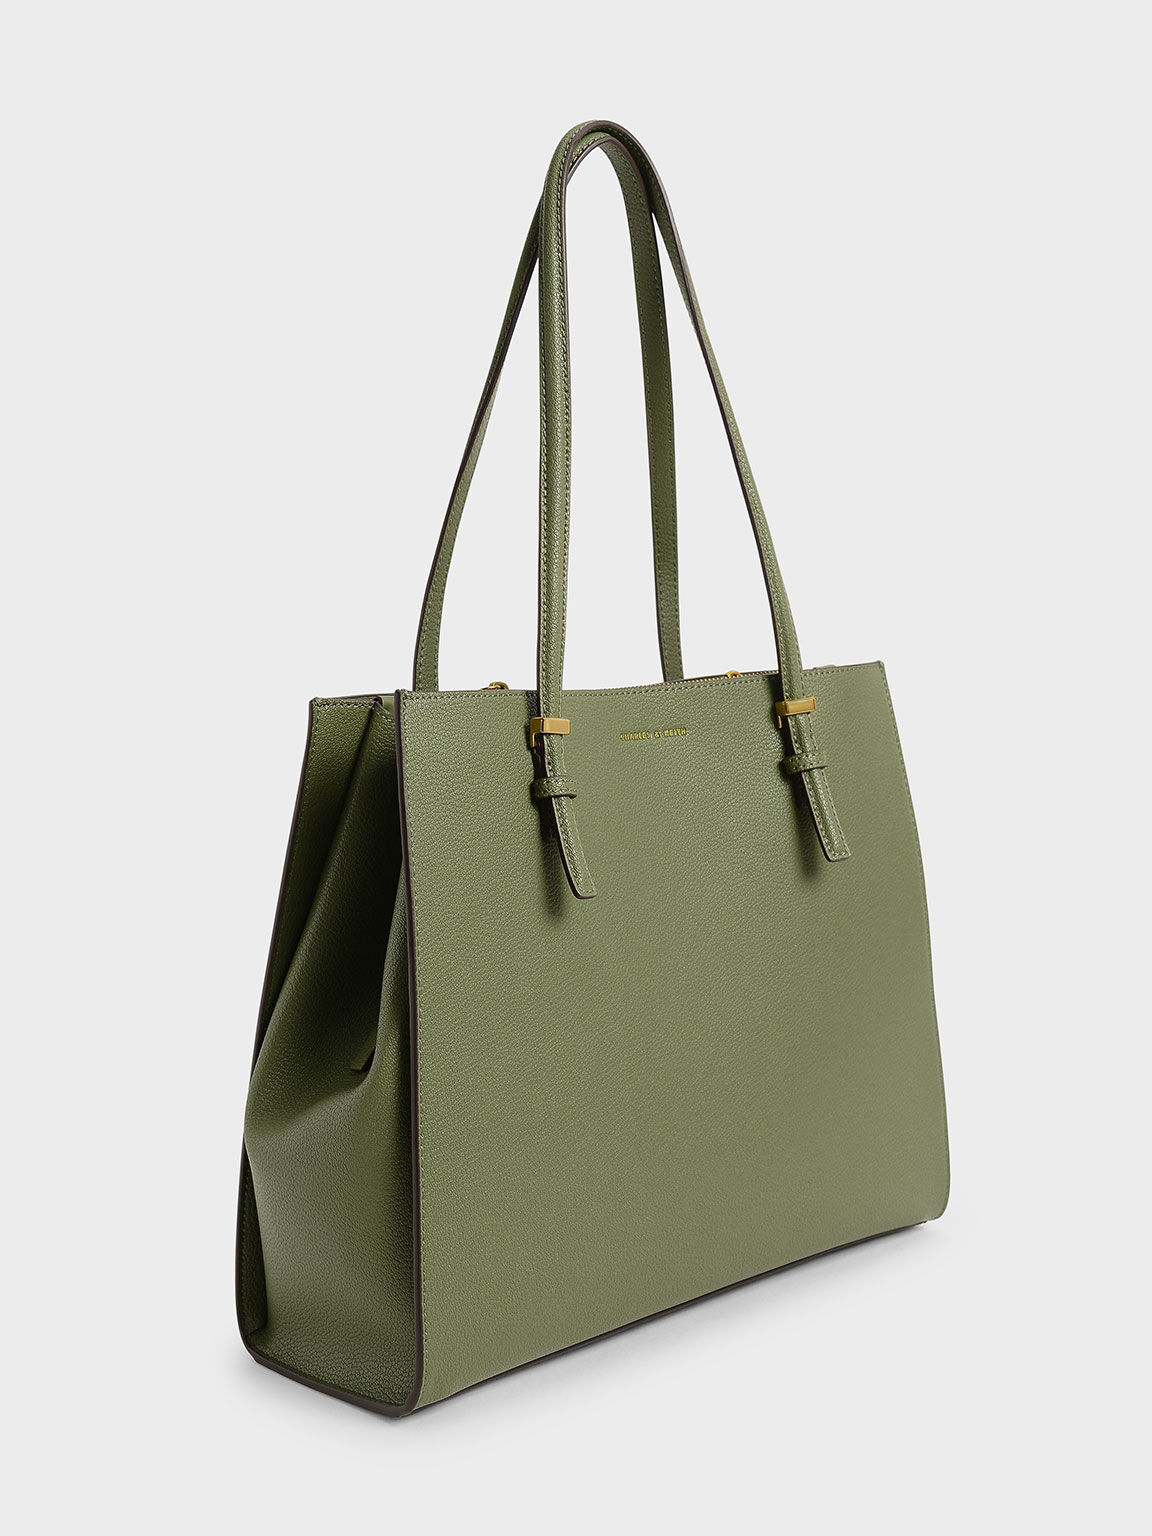 Tas Tote Large Double Handle, Olive, hi-res